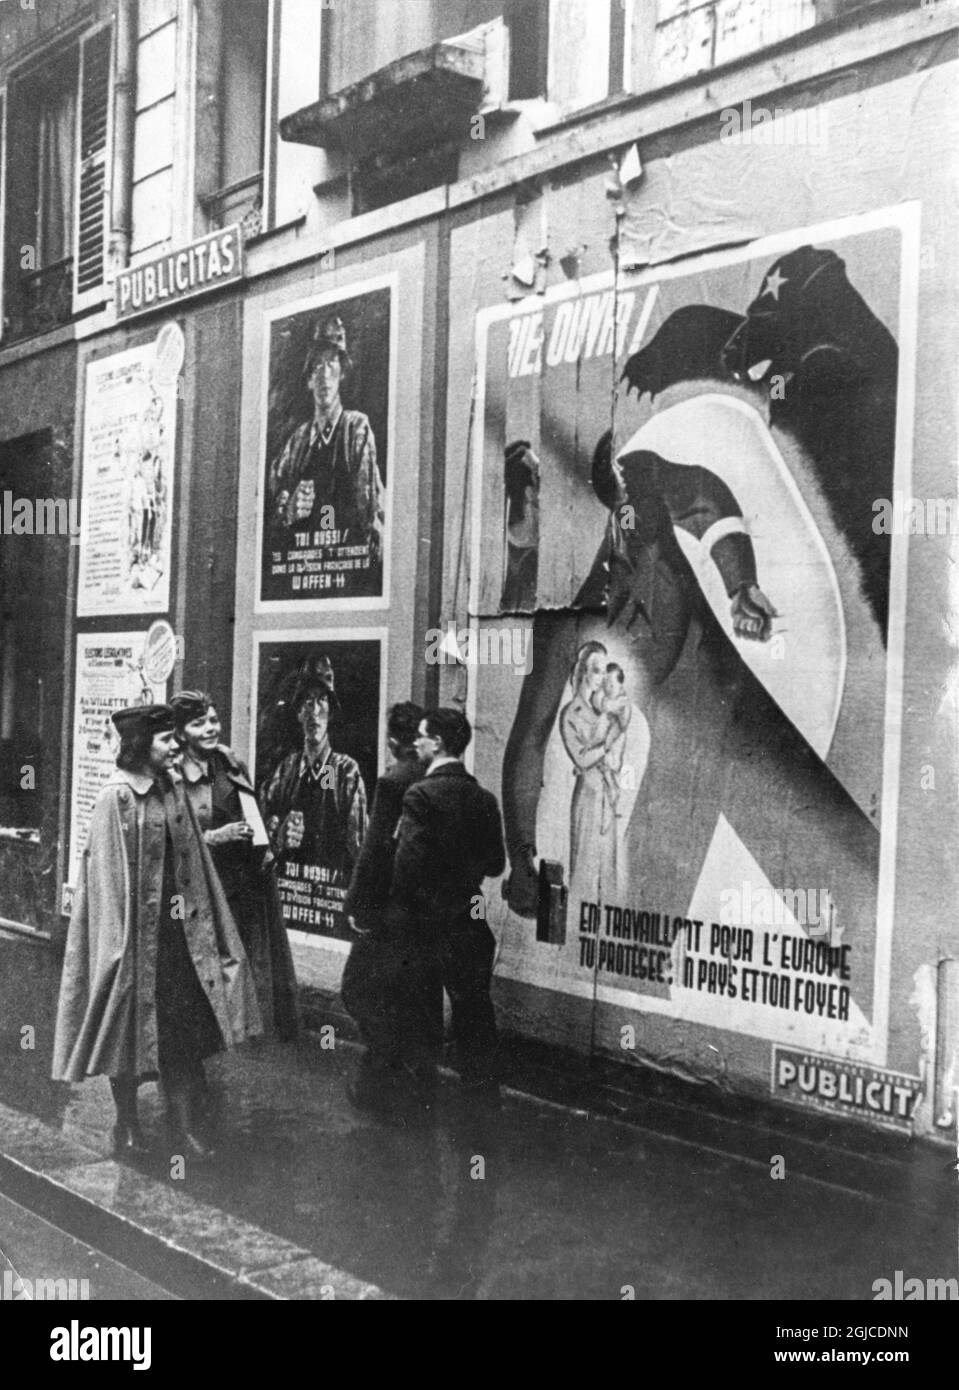 PARIS, FRANCE 1940-1944 People passing by recruitment posters for German Waffen-SS on the street in Paris during the occupation of Paris and other parts of France duirng the Second World War. Photo: Pressens Bild / Orbis / Kod: 190 Stock Photo